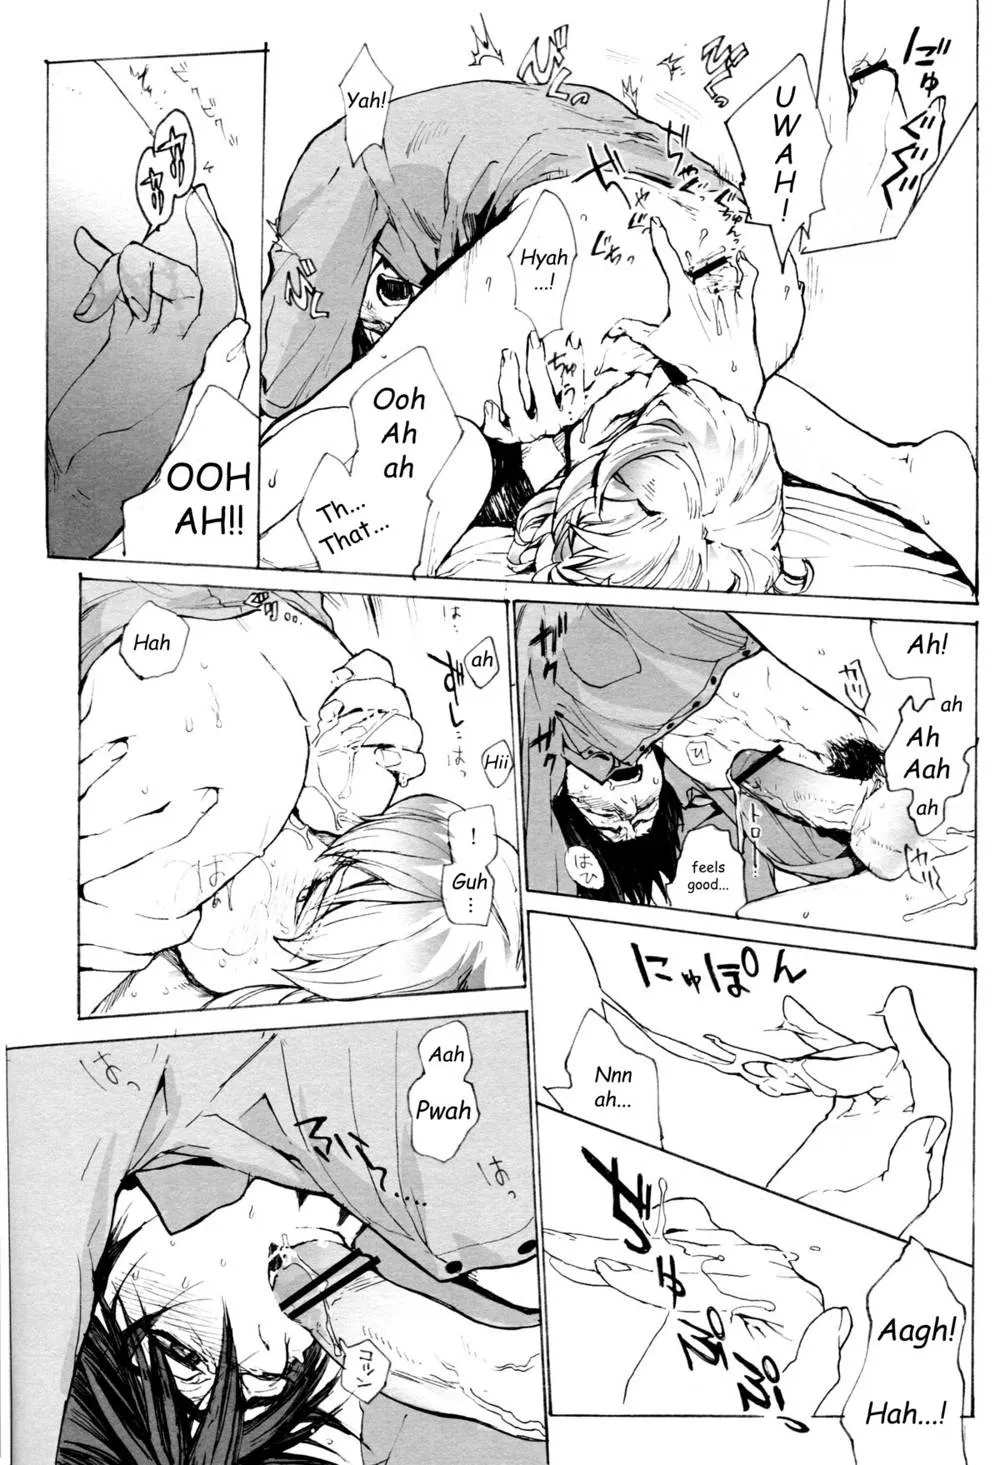 Tiger And Bunny,WAM – Wet And Messy [English][第22页]